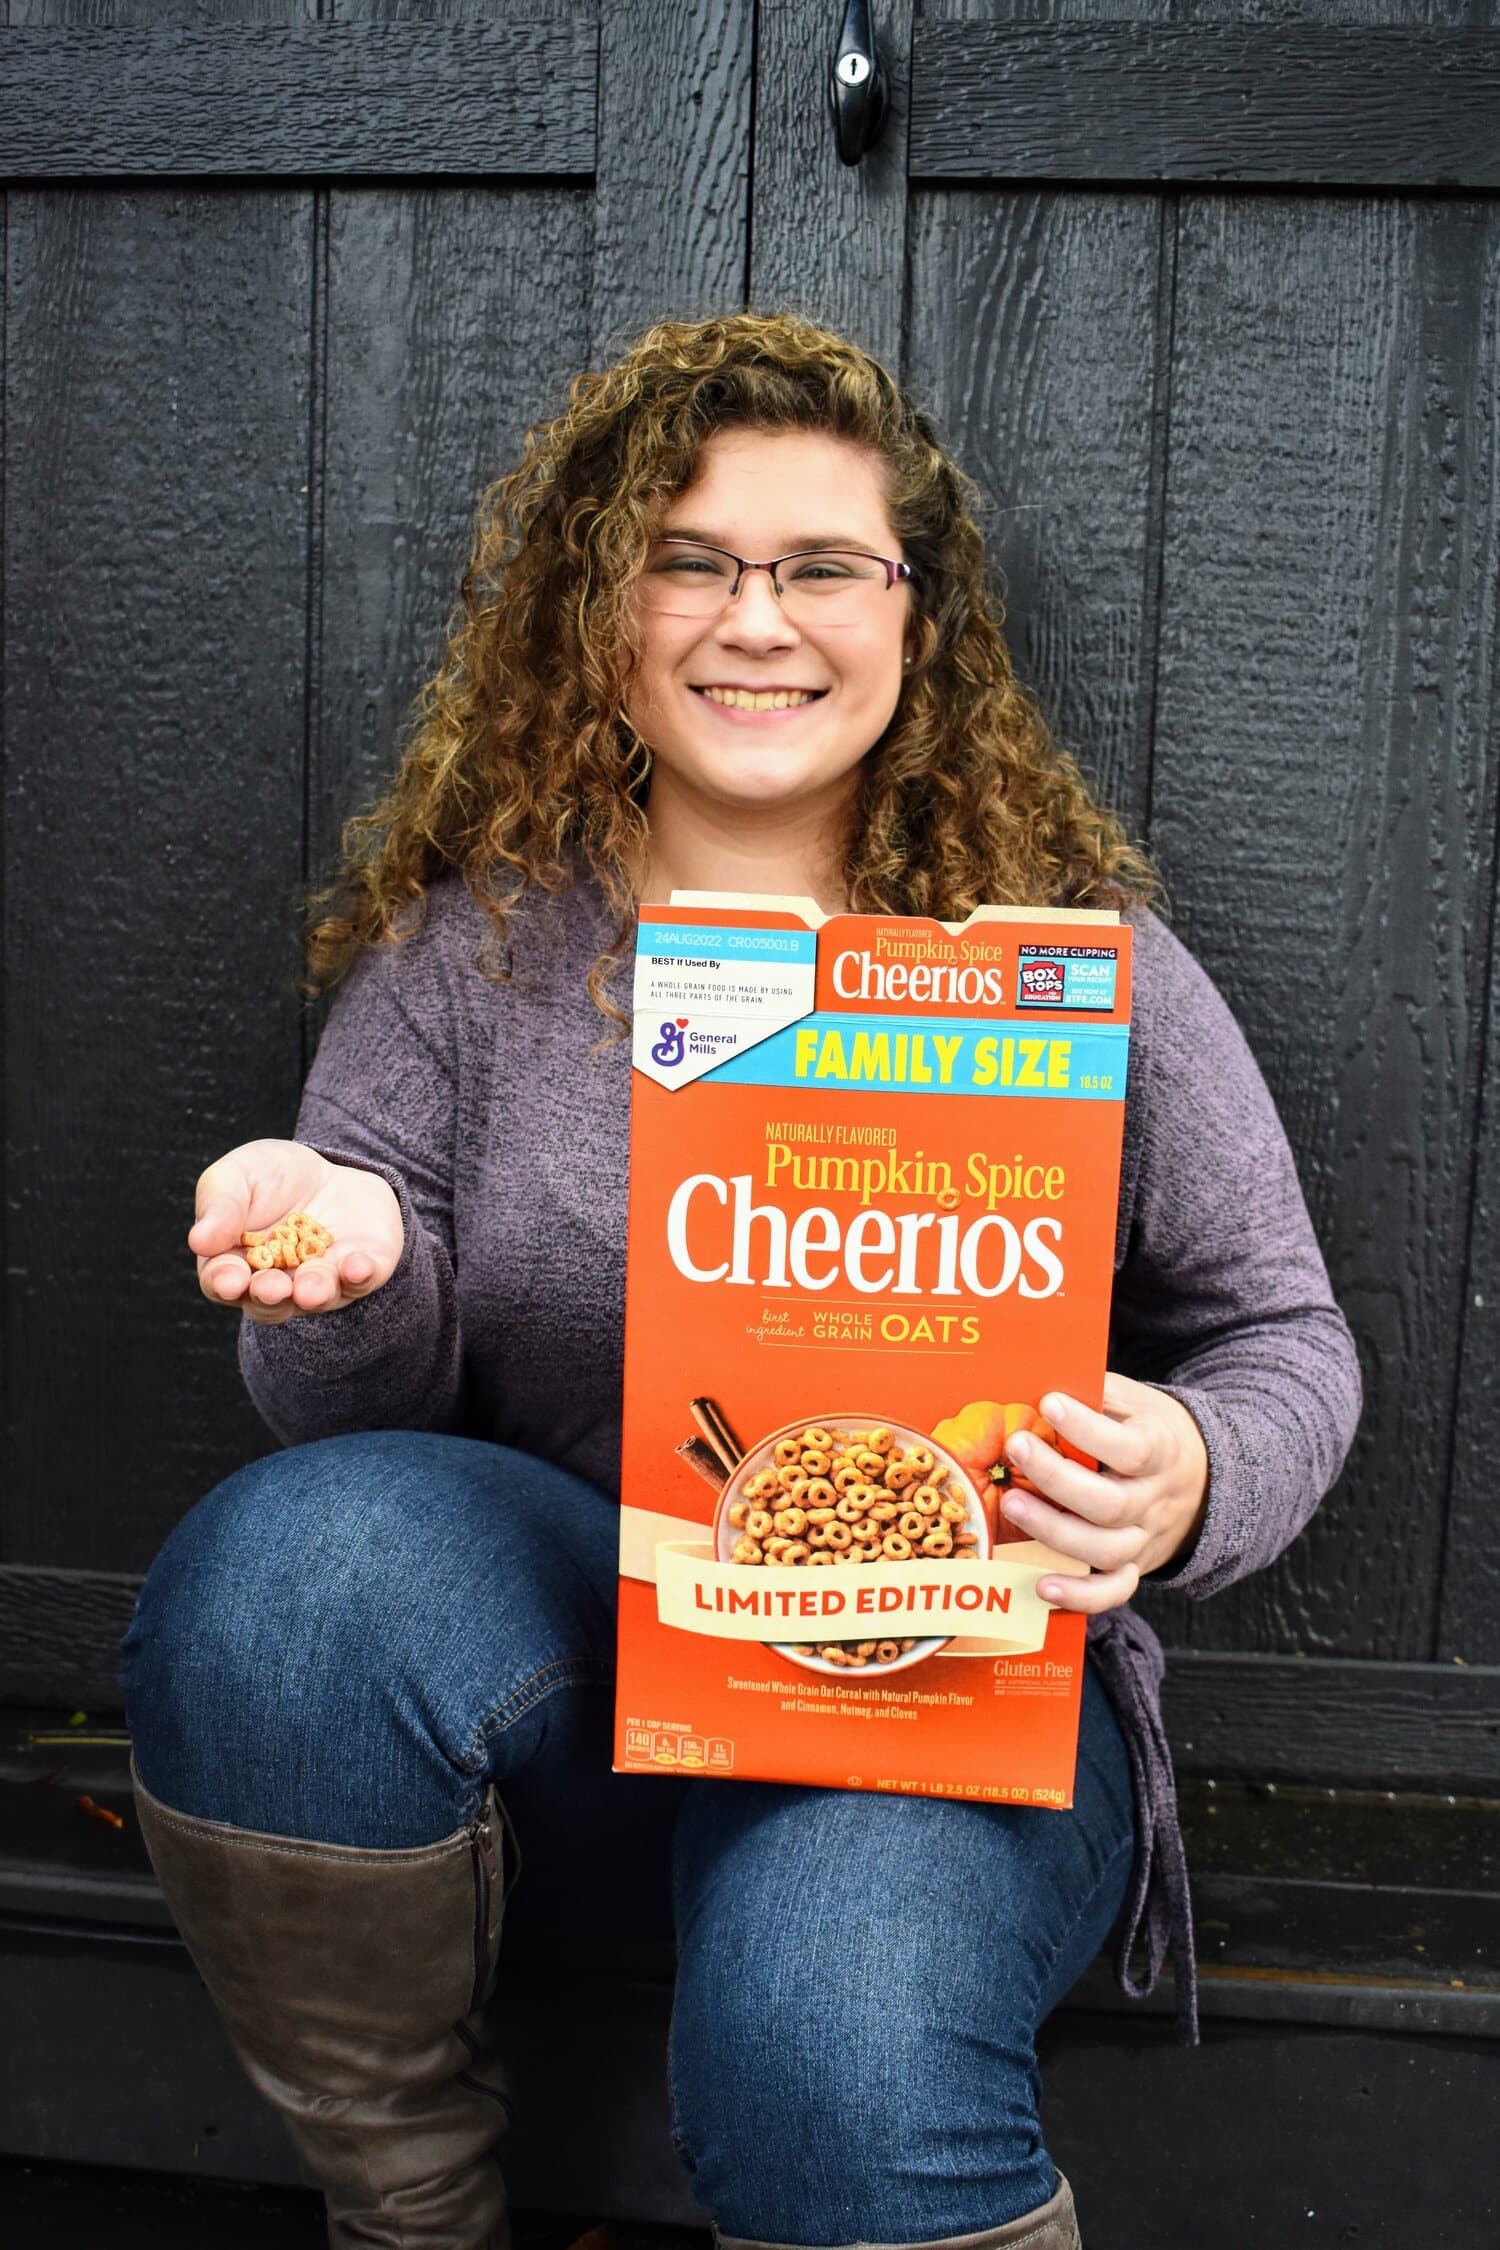 Need something for breakfast? The pumpkin spice cheerios Williamson is showing will definitely provide a hardy start to your day.